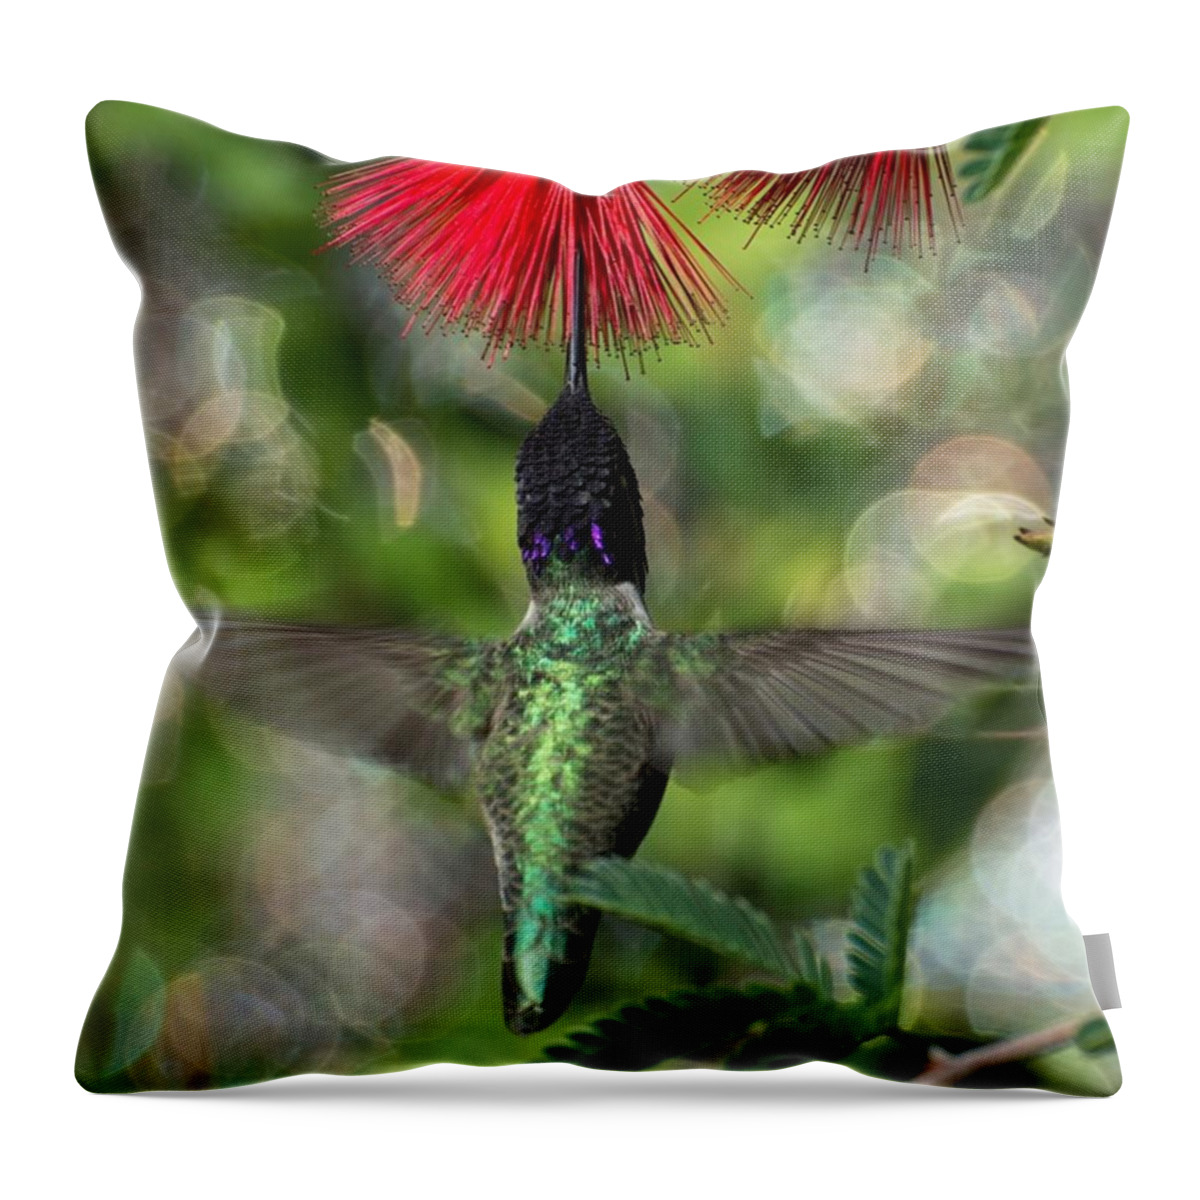 Flower Throw Pillow featuring the photograph Hummingbird In Flight #1 by Michael Moriarty